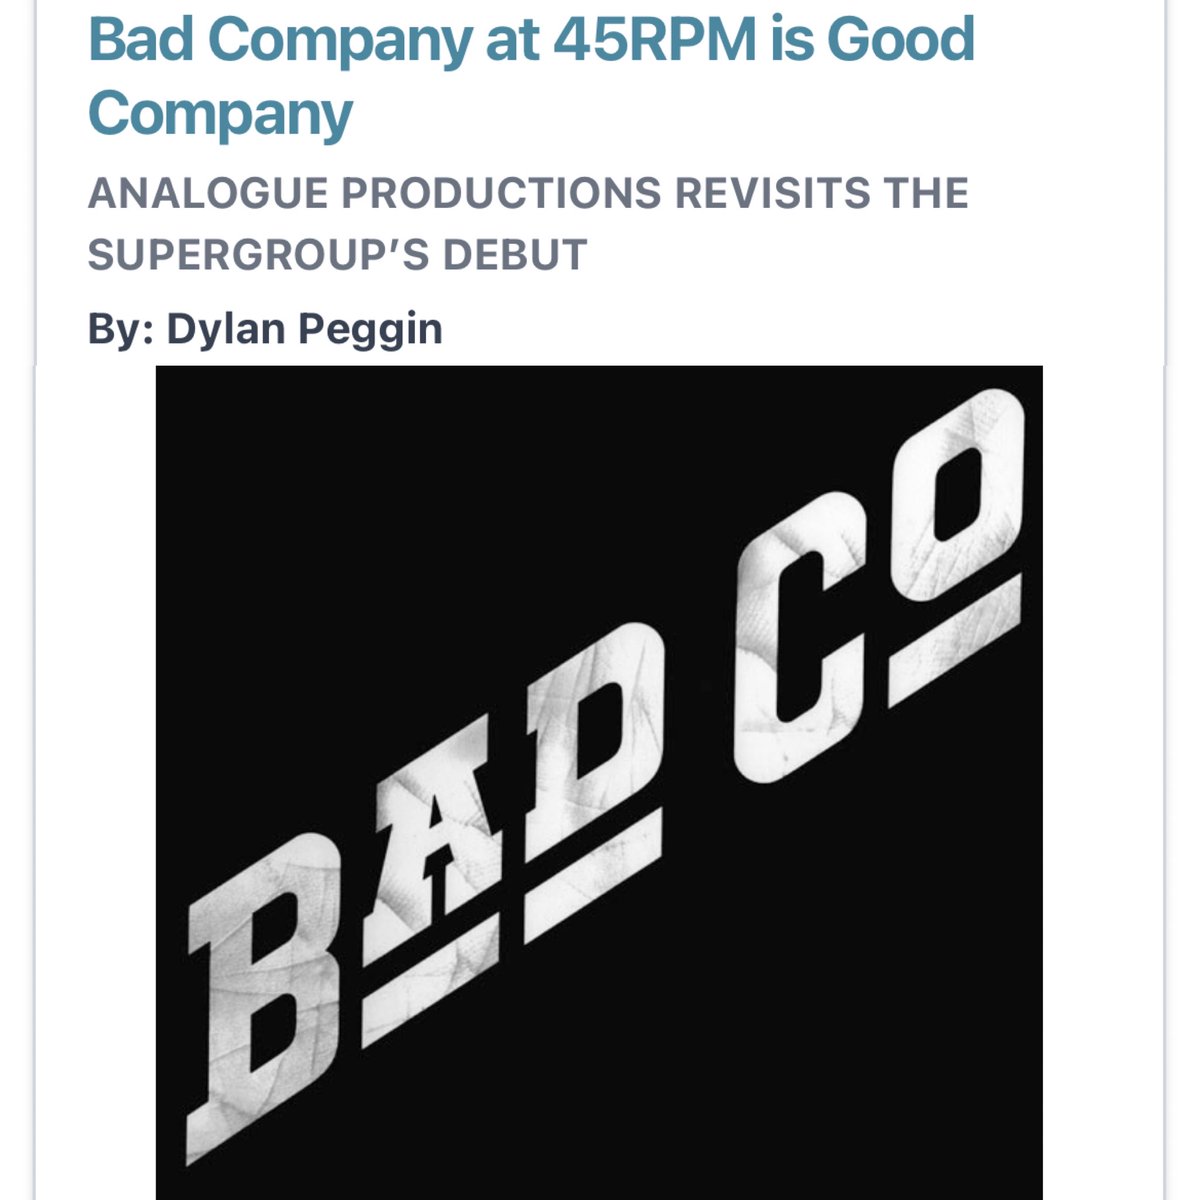 My review of the Analogue Productions pressing of Bad Company’s self titled debut is up on @tracking_angle . Give it a read! #badcompany #paulrodgers #simonkirke #bozburrell #mickralphs #analogueproductions trackingangle.com/music/bad-comp…